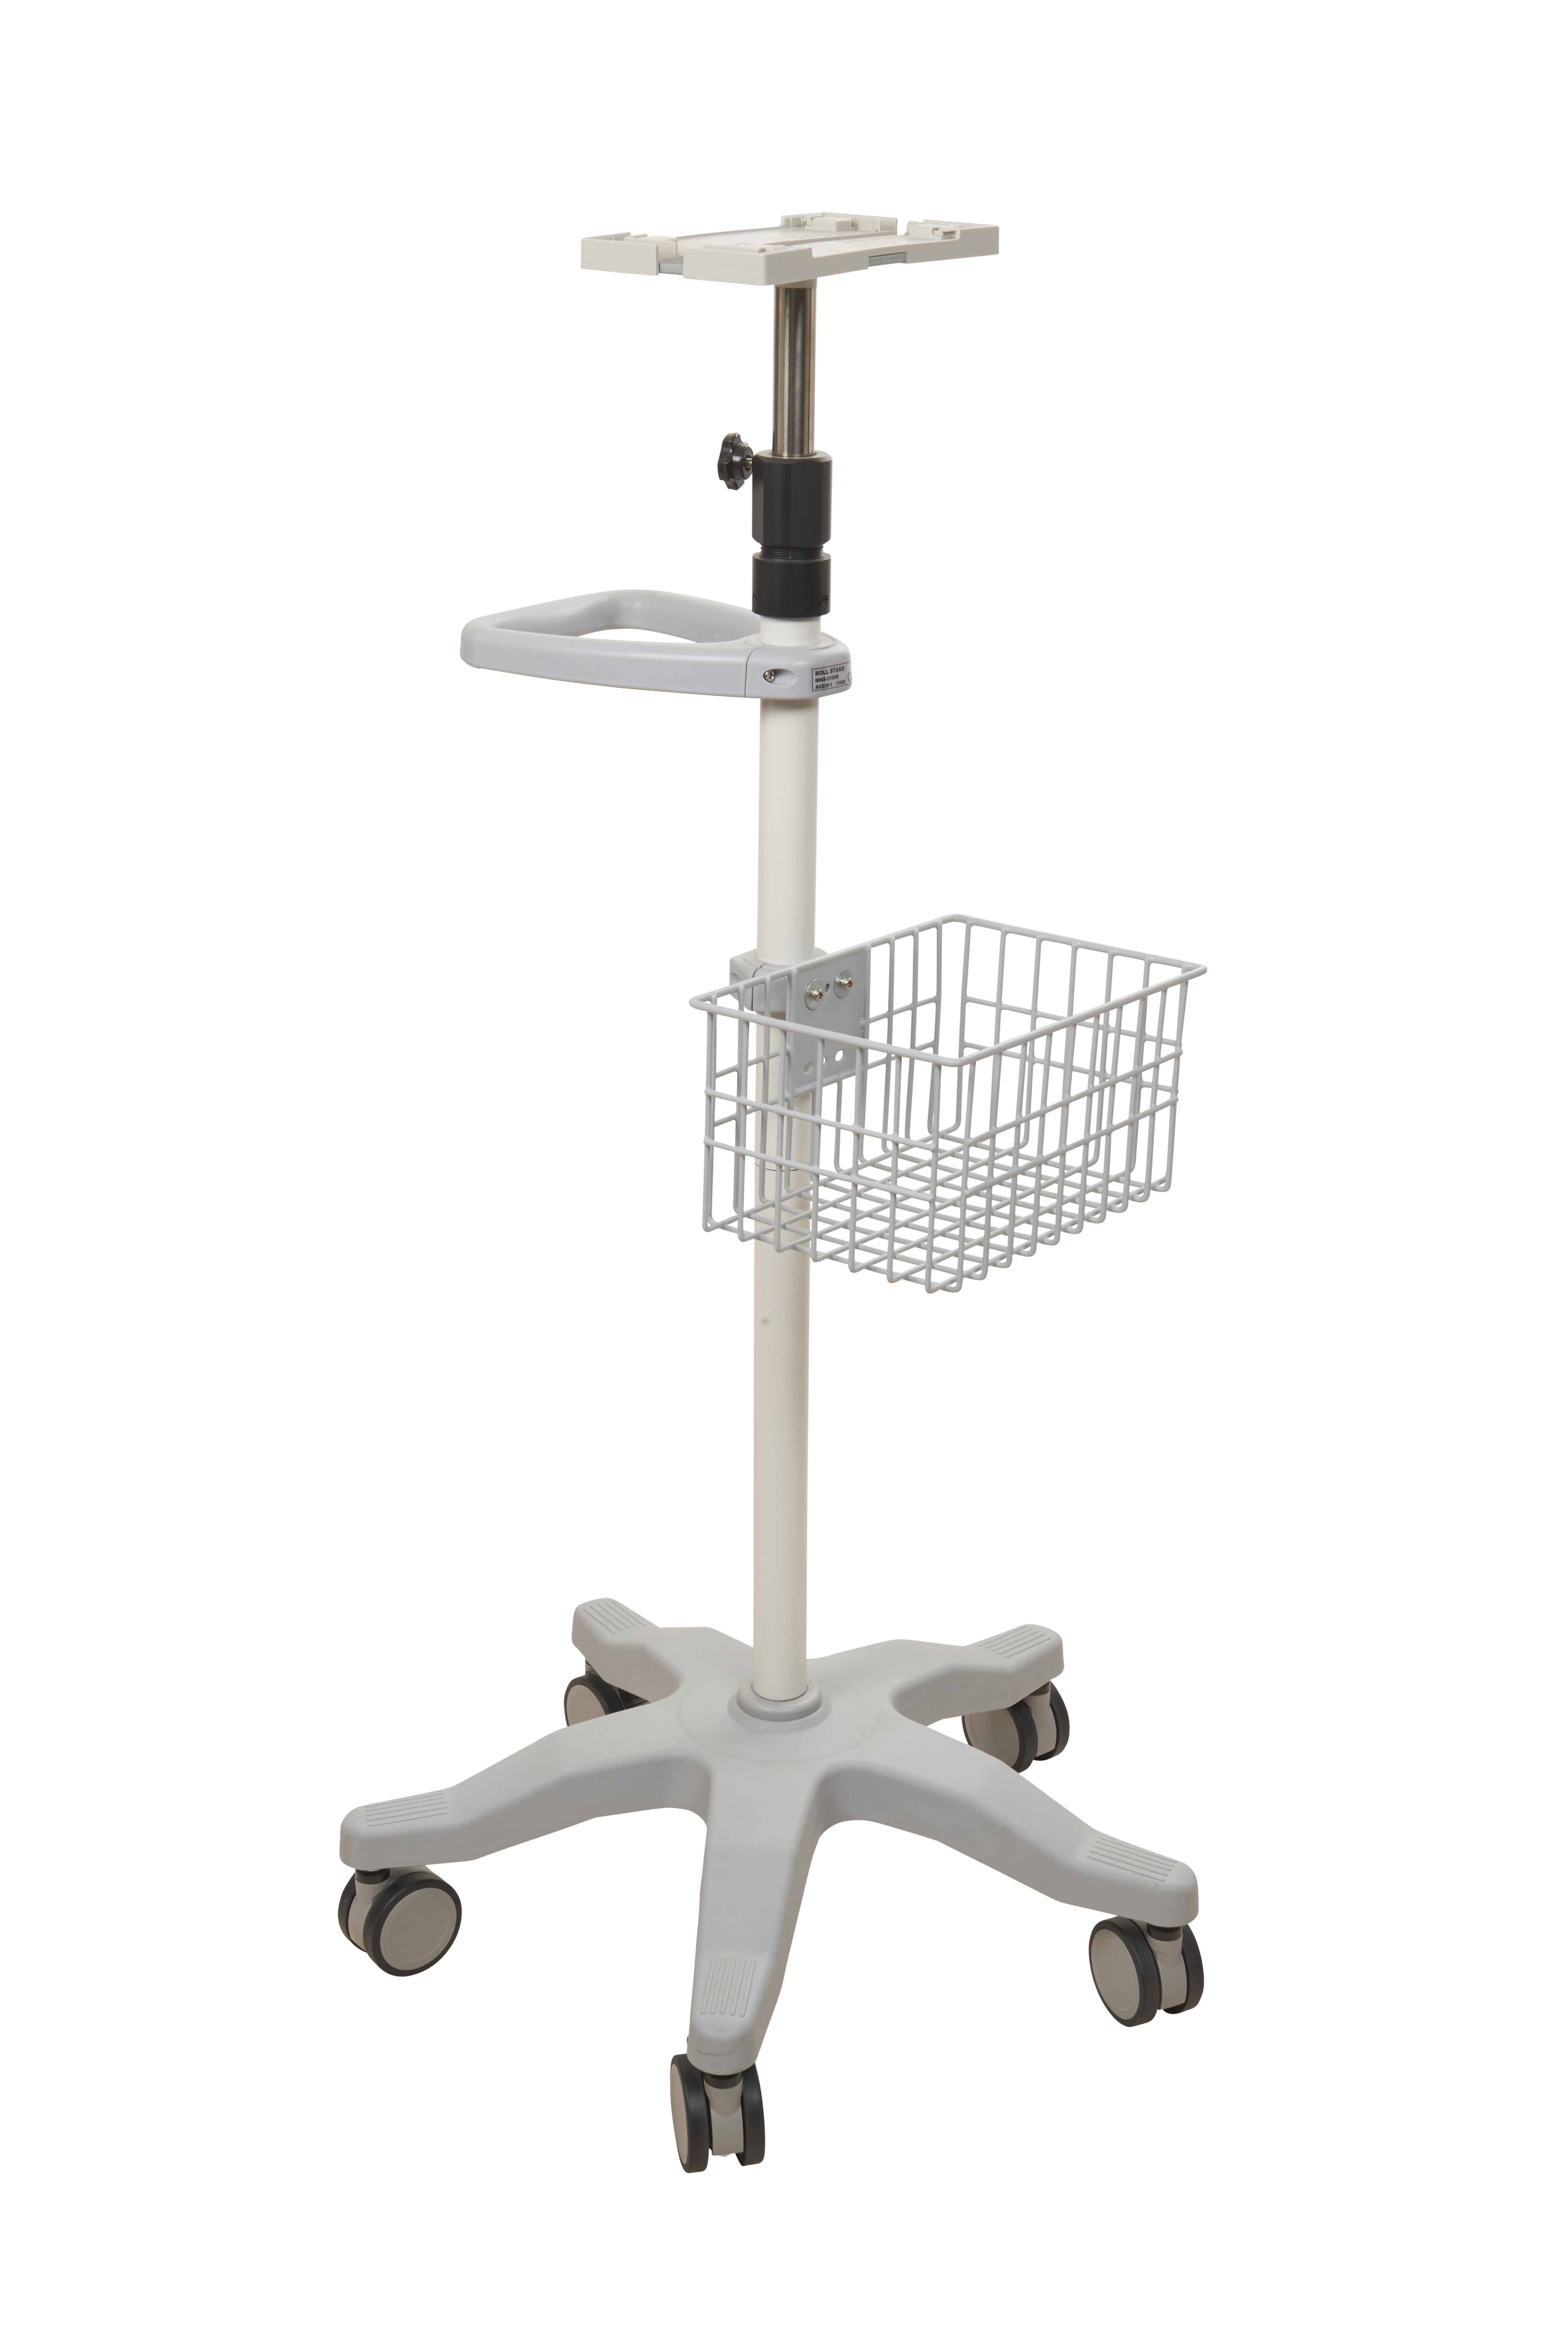 HS-VPM15 Rolling Stand